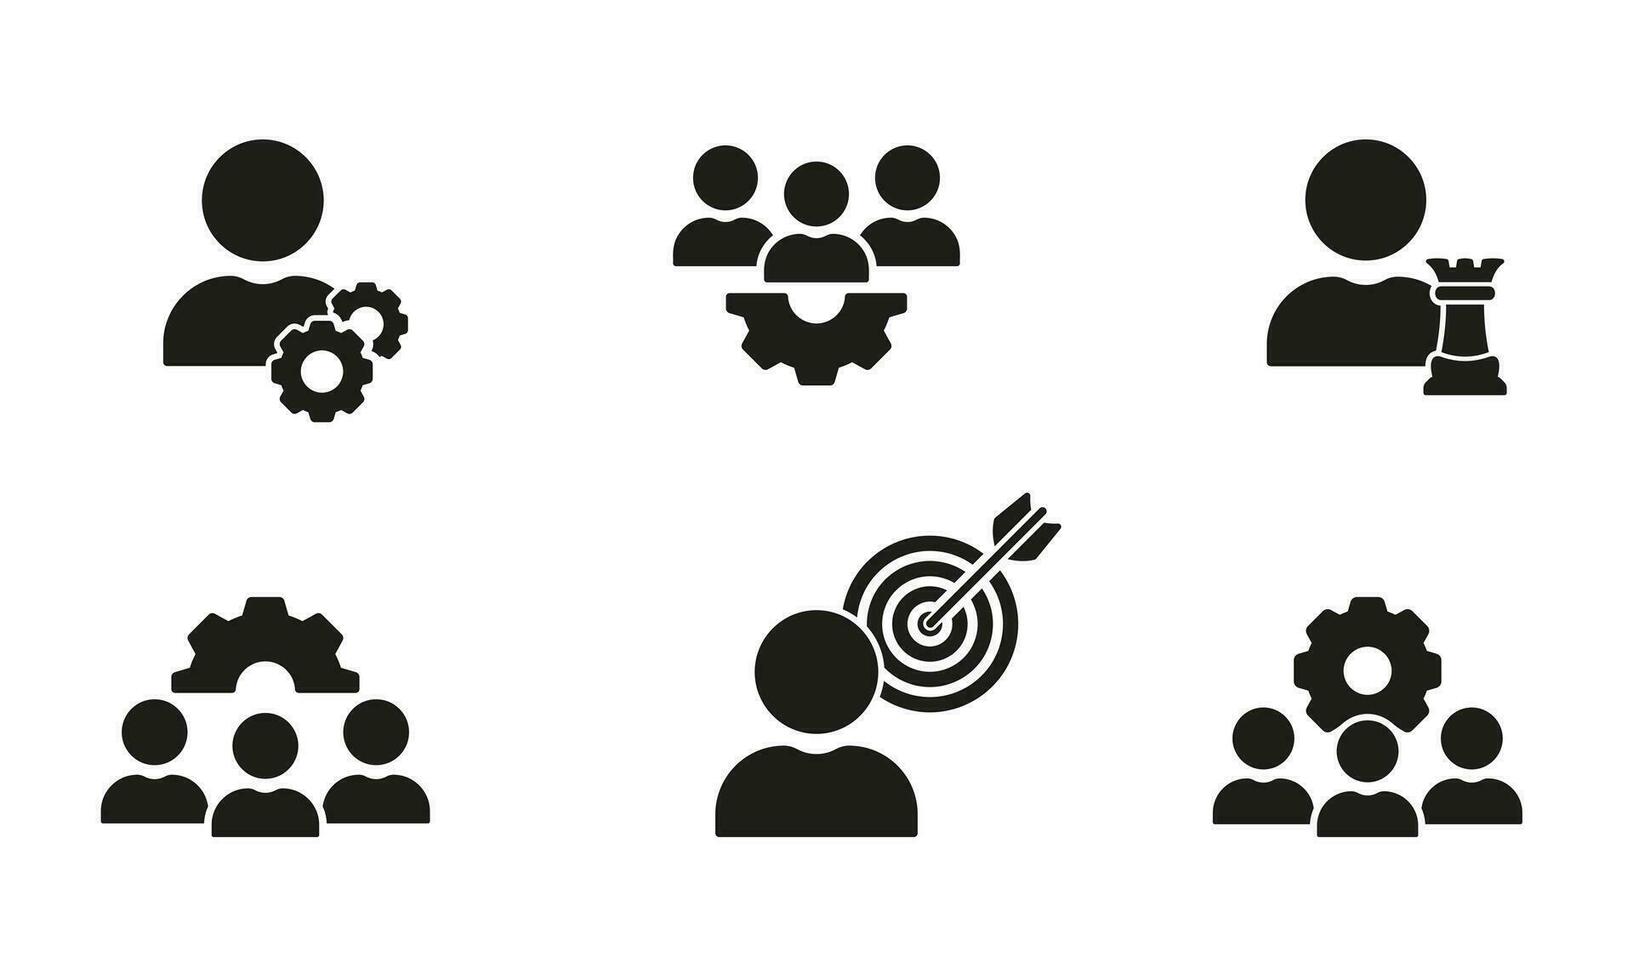 Strategic Objective Silhouette Icons Set. Efficiency Teamwork and Cooperation Glyph Pictogram Collection. Entrepreneur Target Solid Sign. Management Symbol Collection. Isolated Vector Illustration.